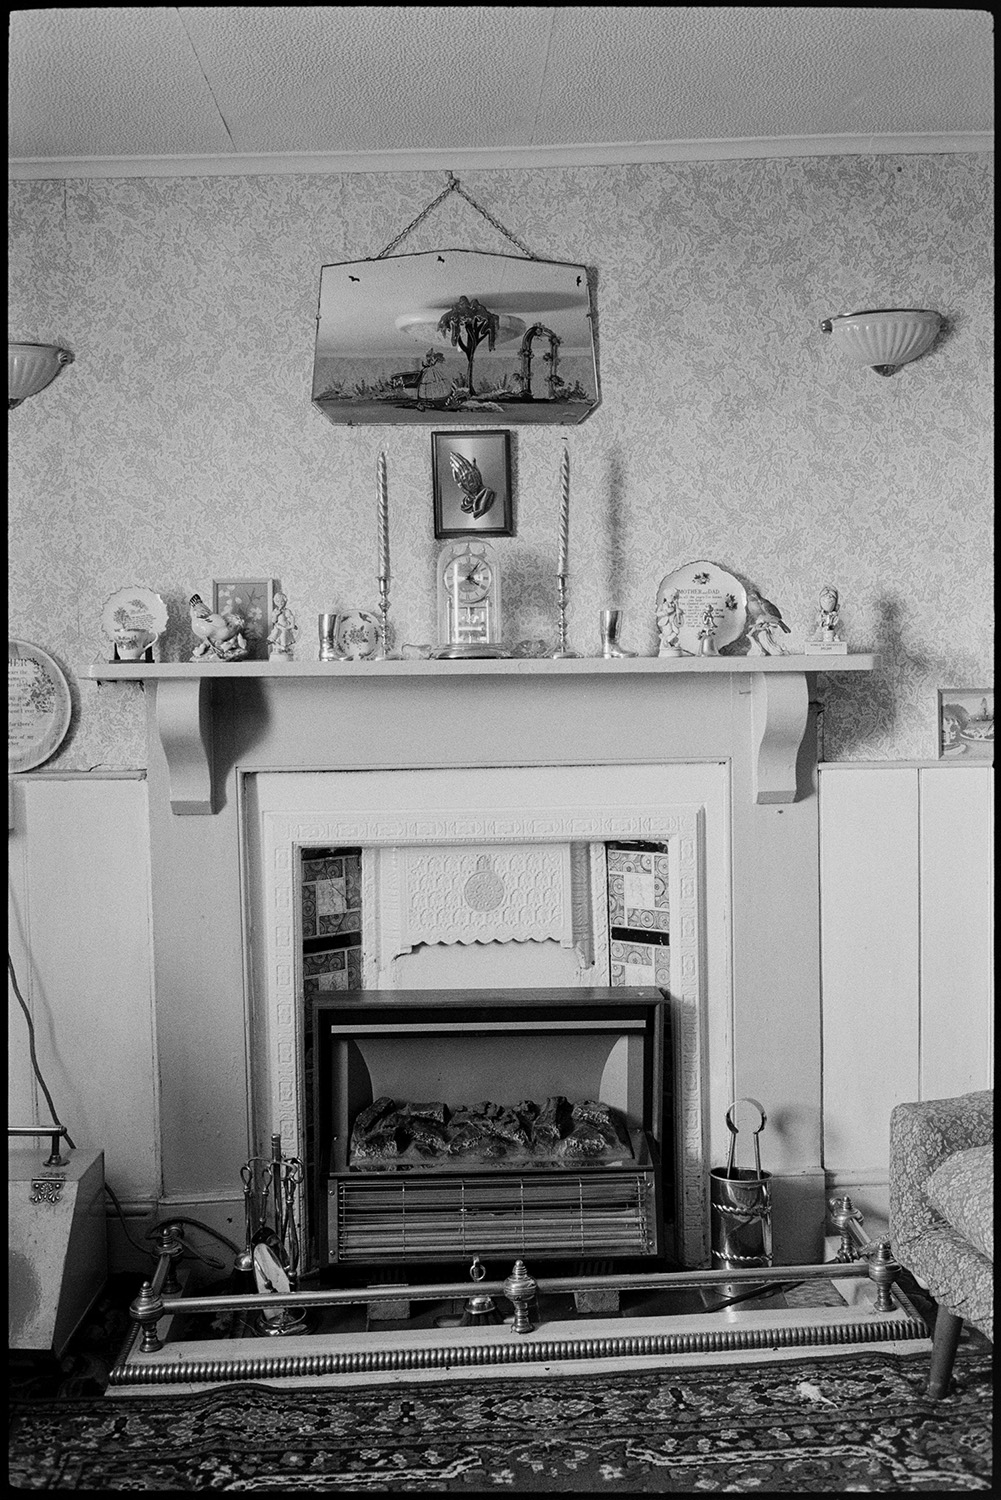 Interior mantelpiece, mirror, comparison with old photo. Ashton, tailor's house.
[Interior of a house in Tricks Terrace, Beaford, which used to belong to Mr Ashton, showing a fireplace with electric fire and mantelpiece. Ornaments and a clock are displayed on the mantelpiece and two pictures are hung on the wall. Mr Ashton was a tailor. An earlier image of the house decorated after his death can be found in the Beaford Old Archive at b00848.]